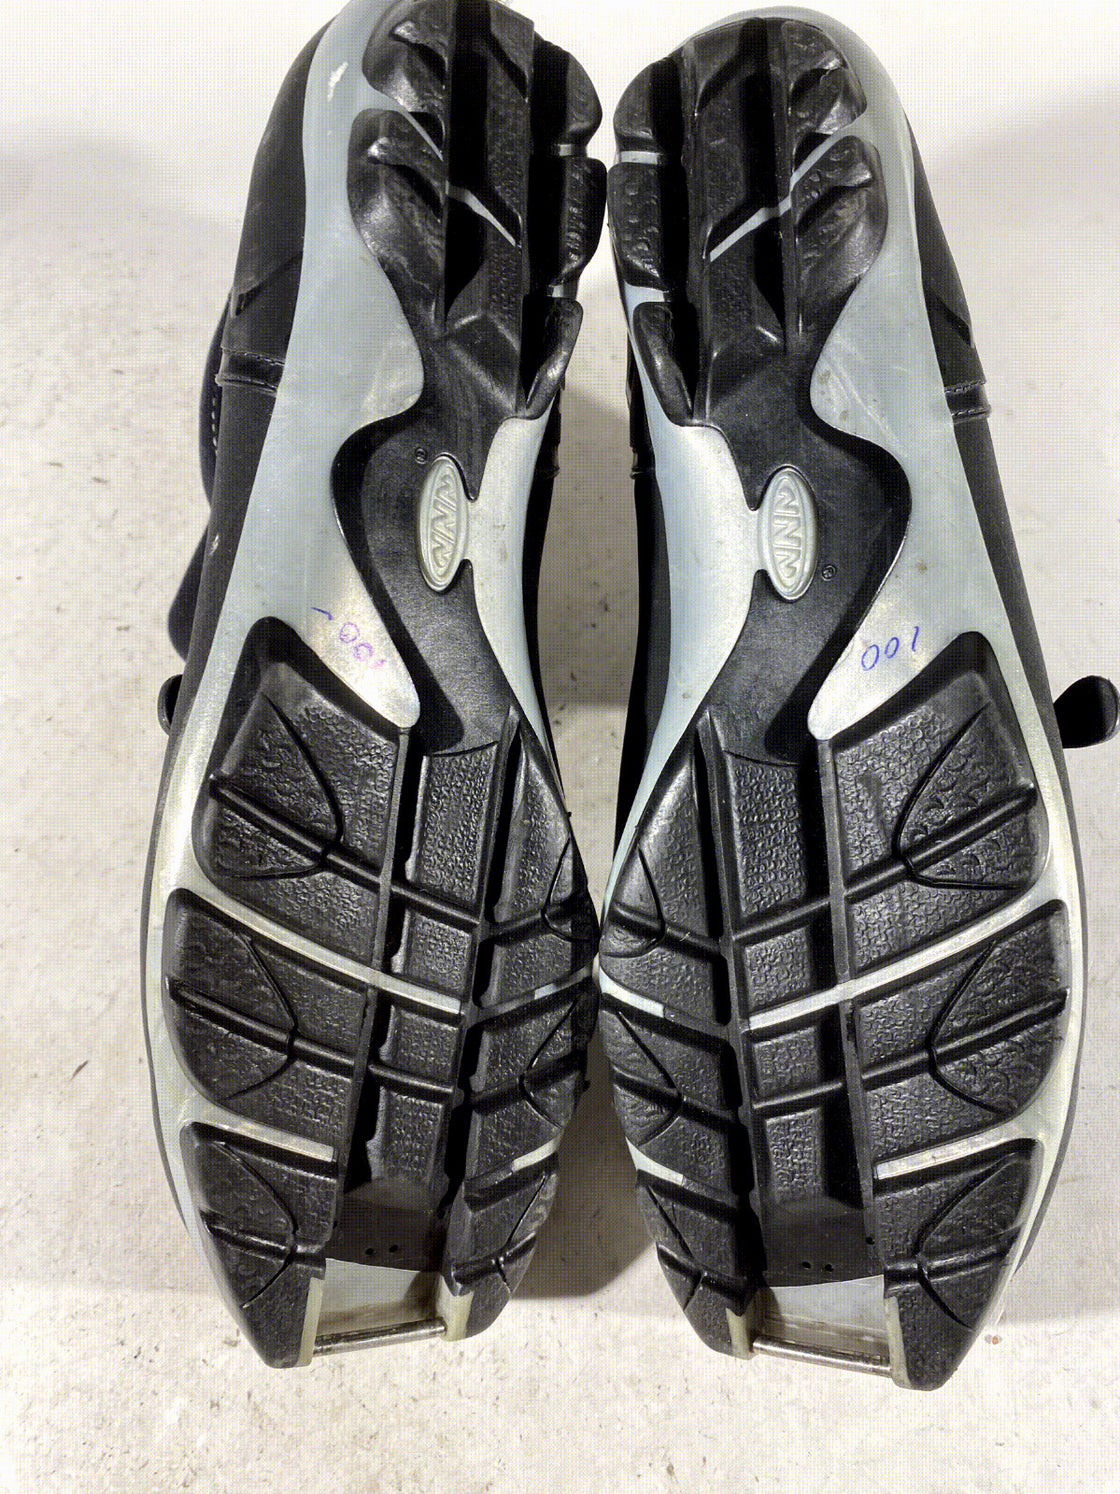 Rossignol Touring Control Nordic Cross Country Ski Boots Size EU47 US13 NNN